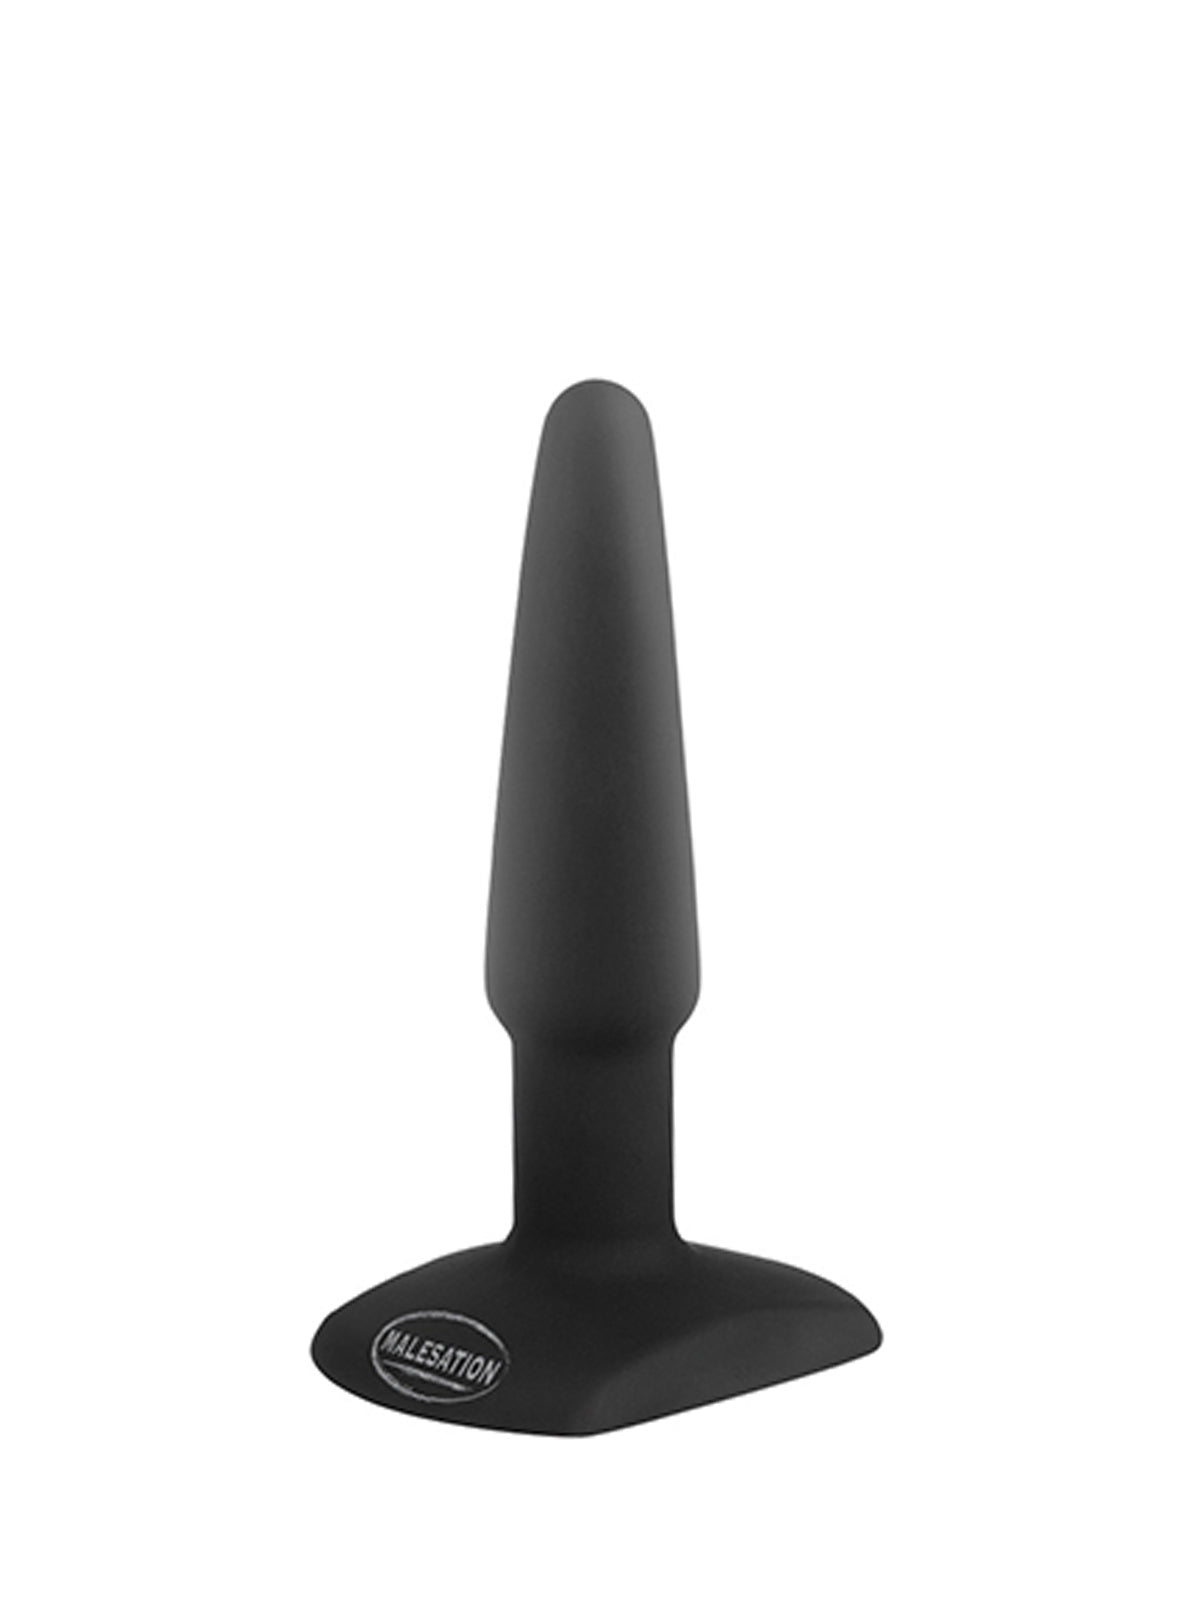 Small3pc Silicone Anal Plugs by Malesation 